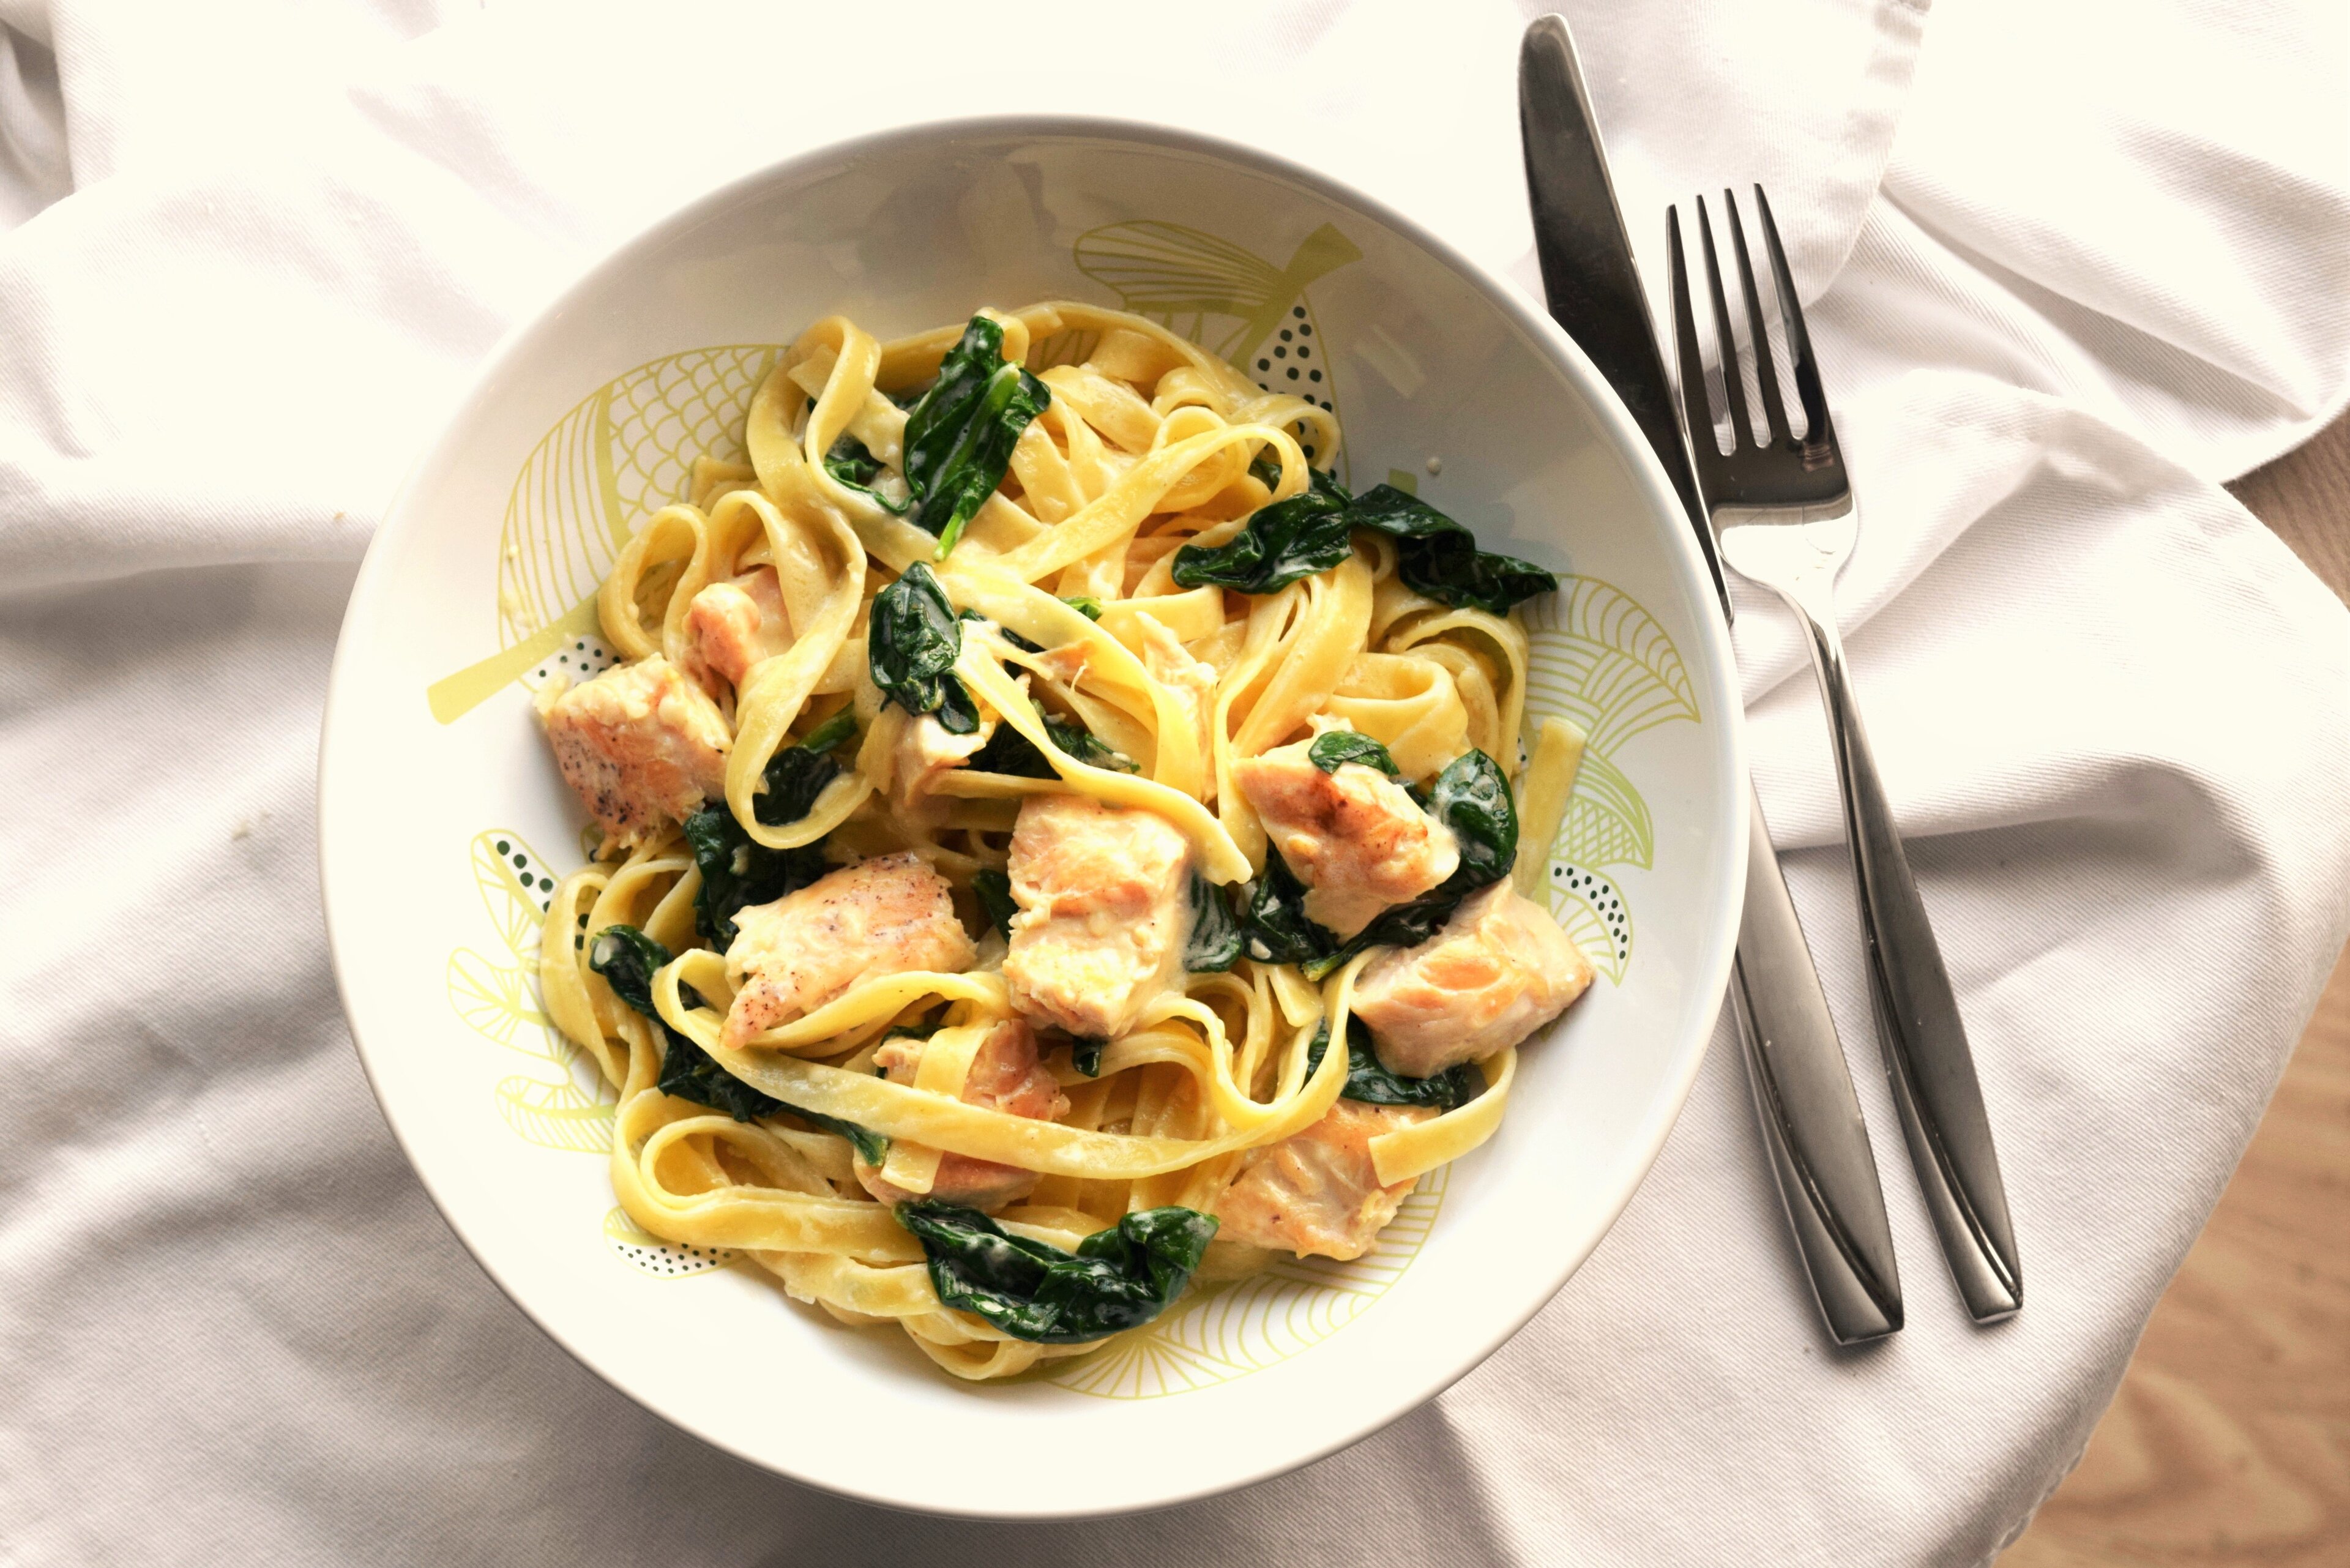 Fettuccine Alfredo with Spinach and Chicken